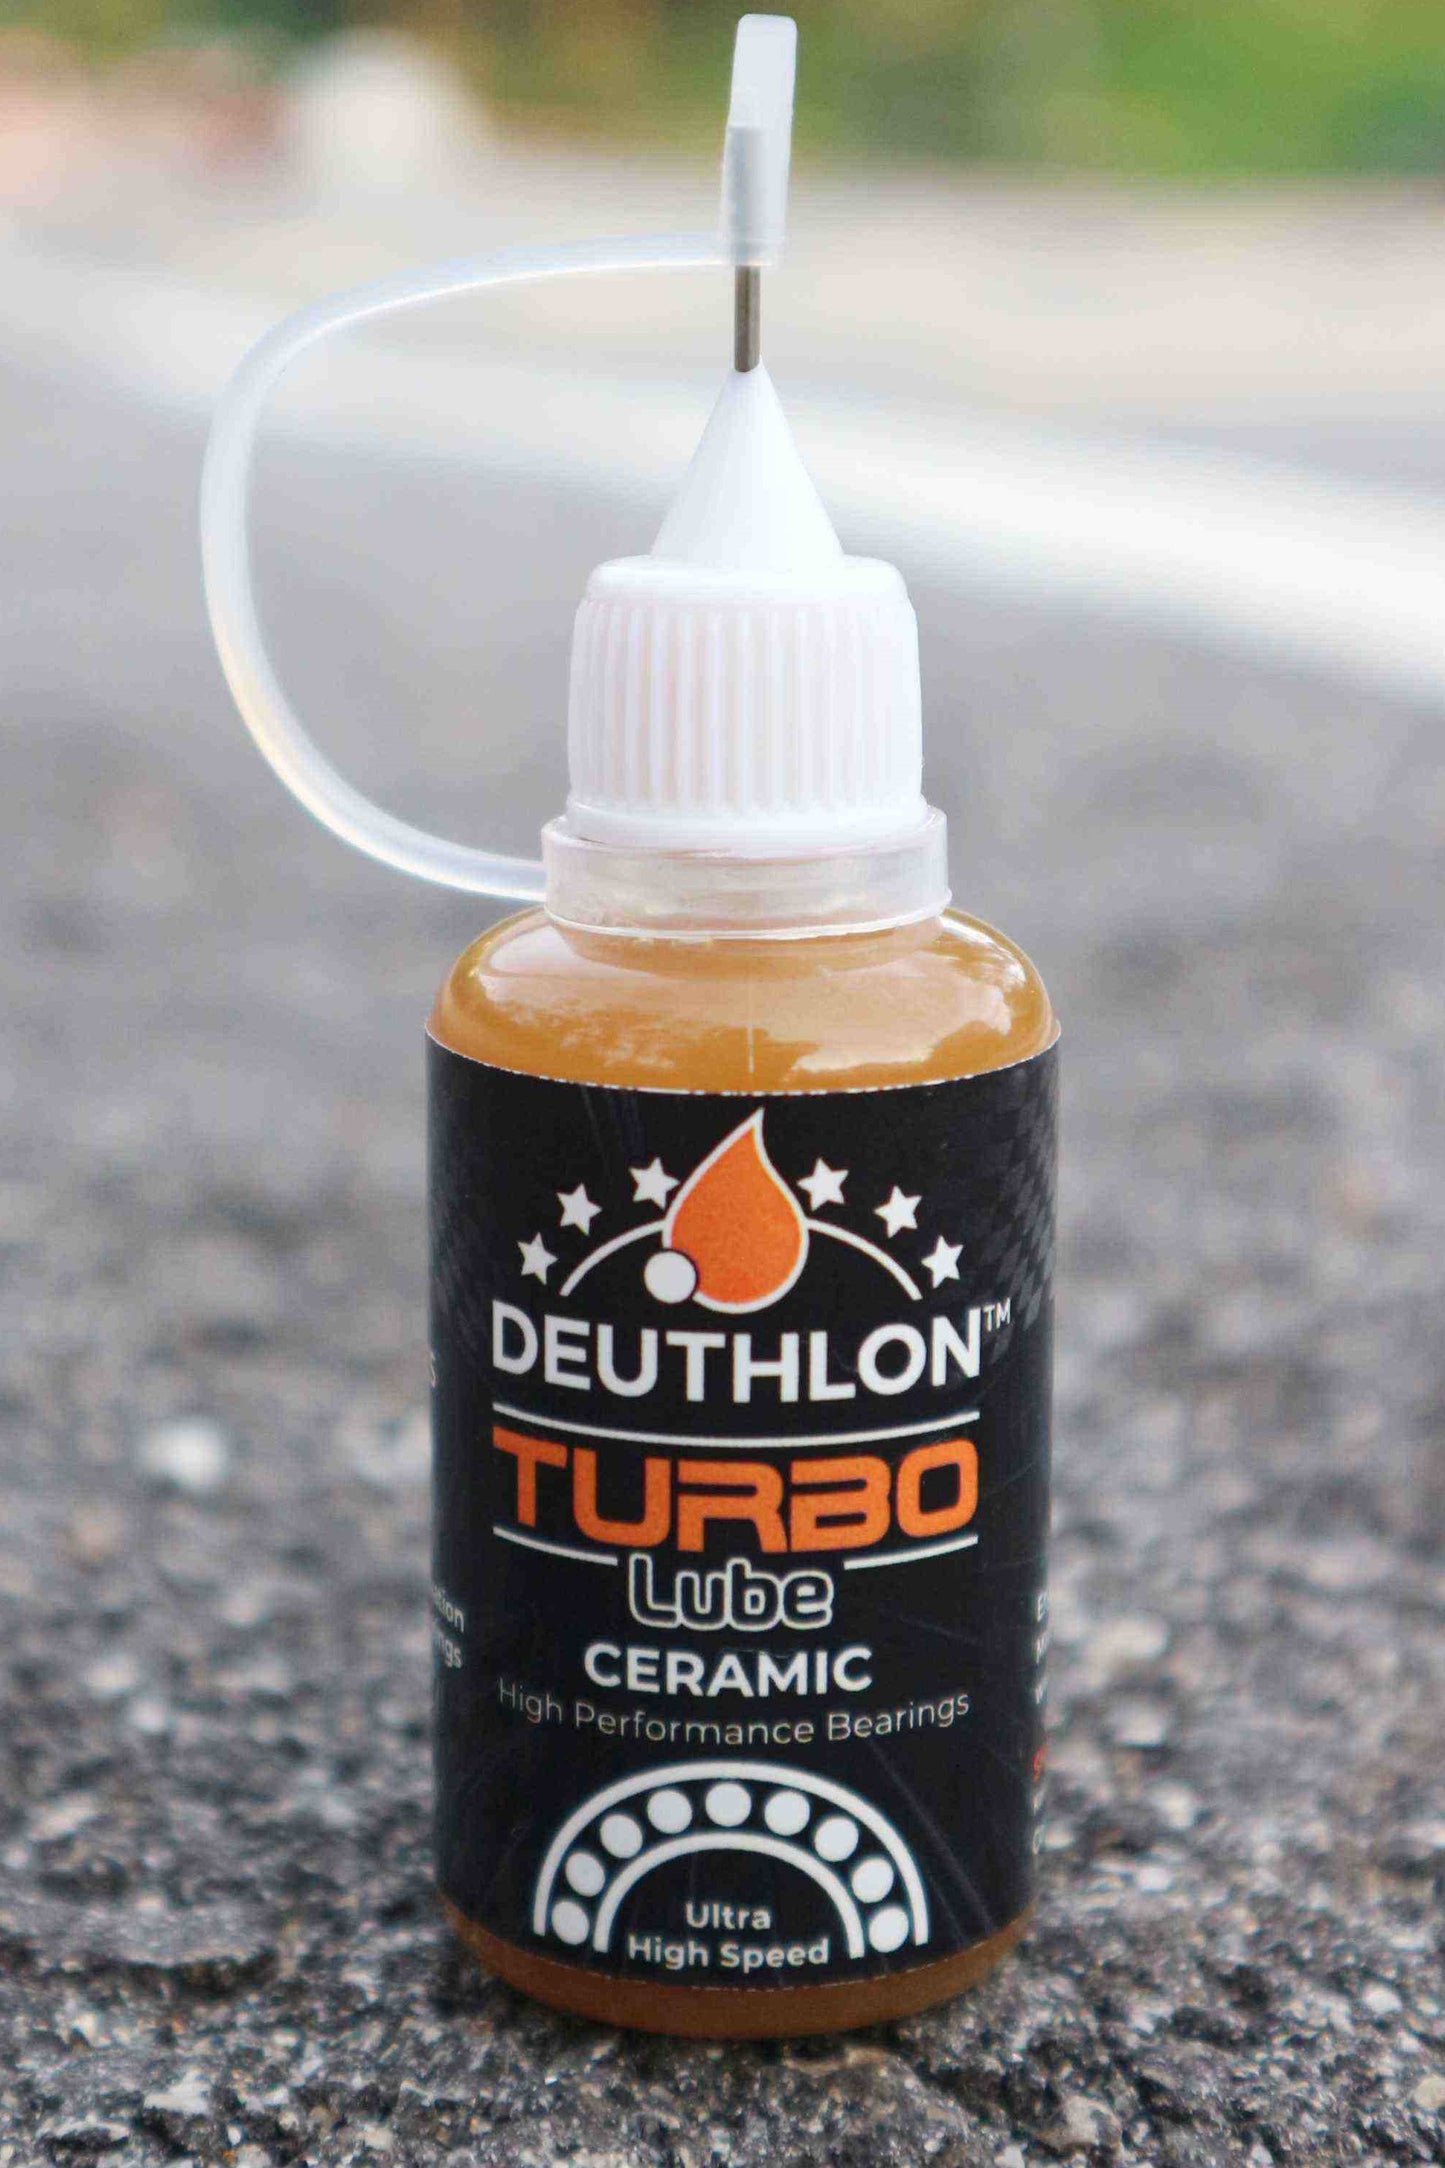 DEUTHLON  No 1 quality lube for EXTREME and PROFESSIONAL SPORTS